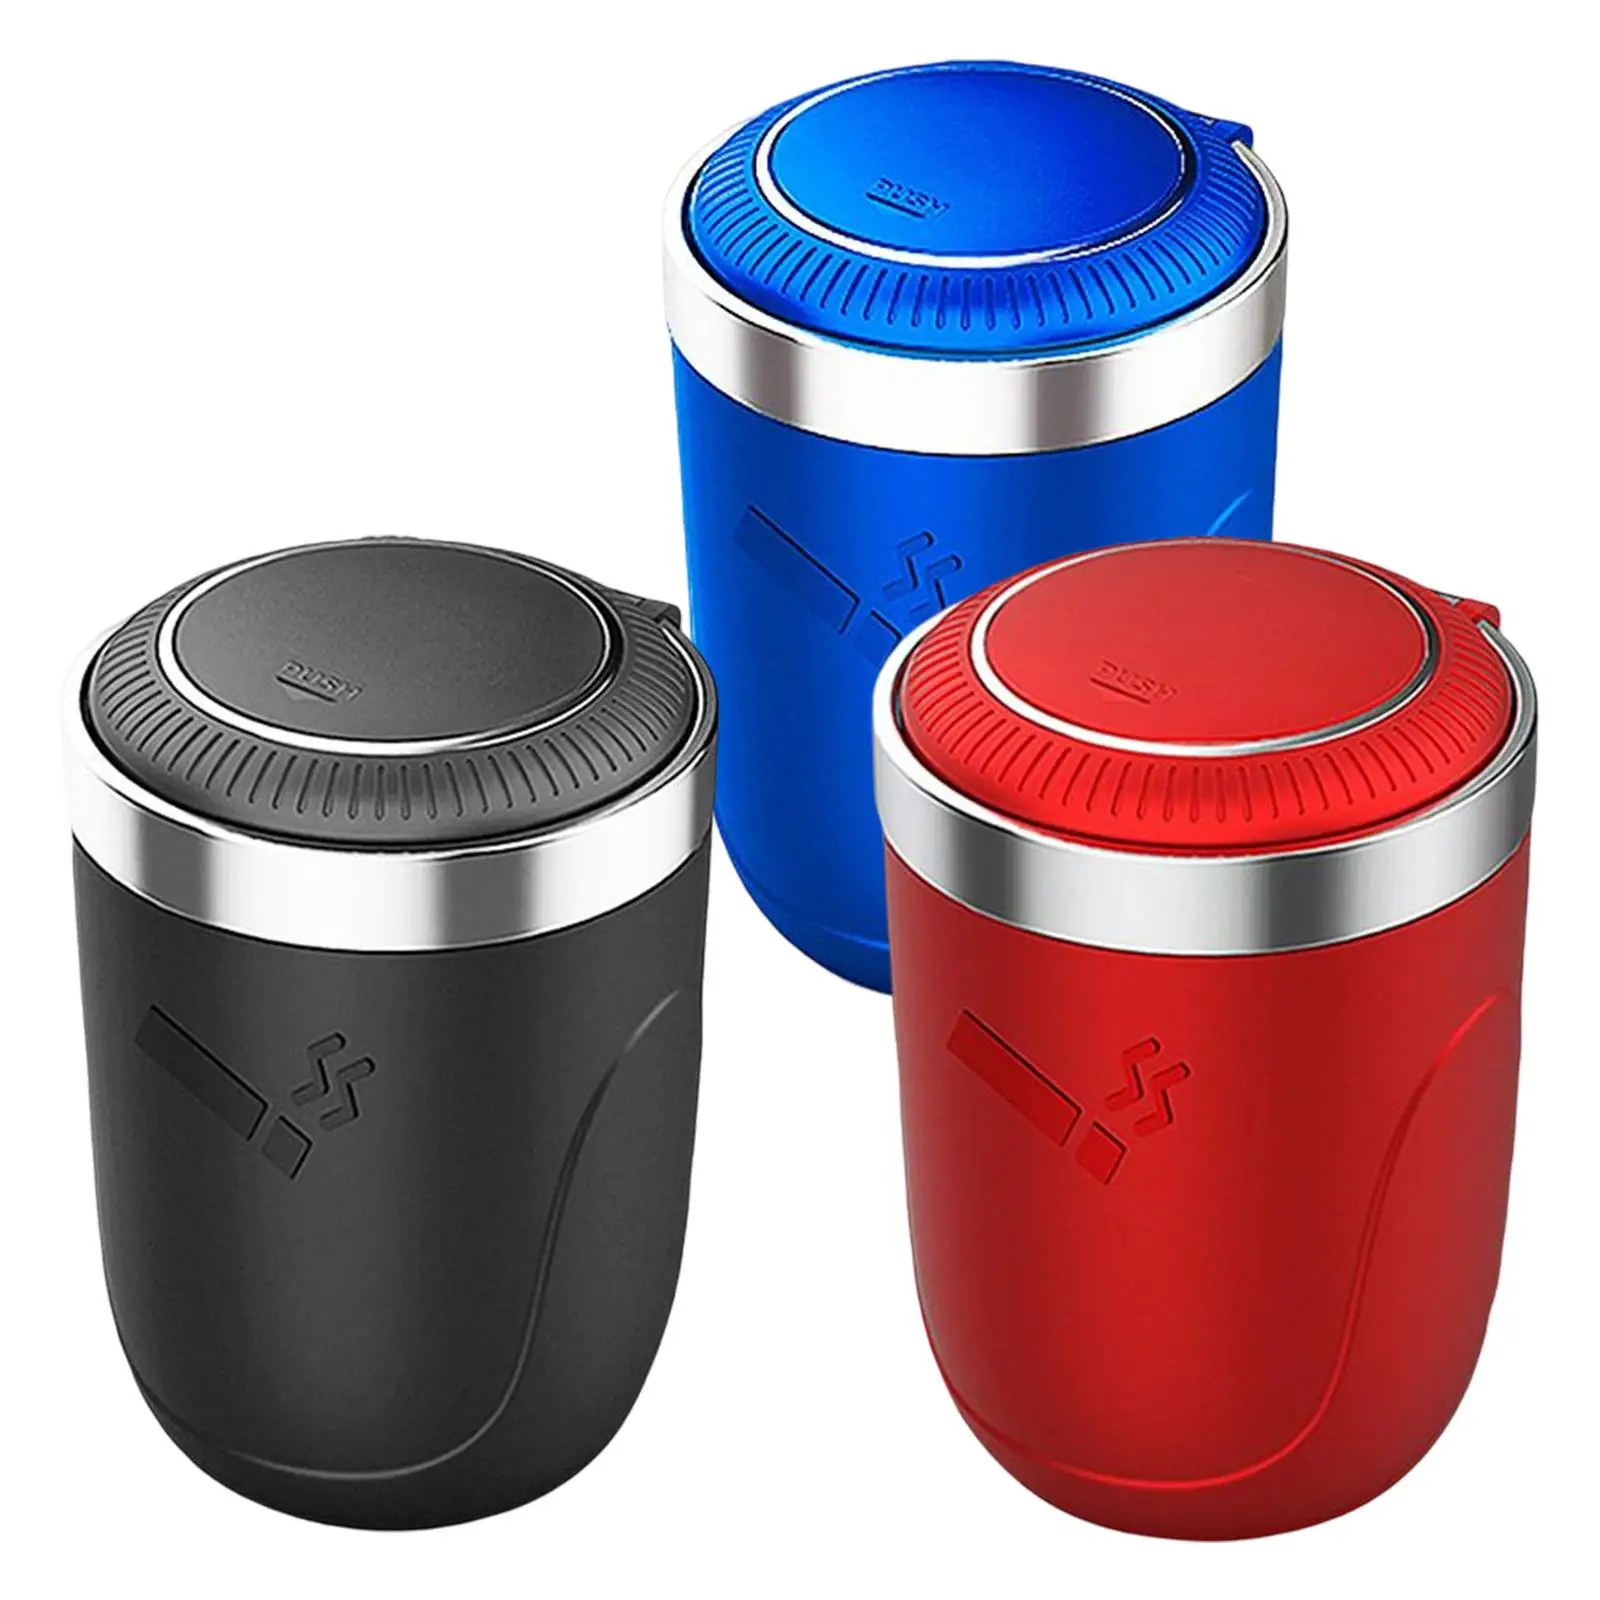 Car Ashtray, with Lid Smokeless Easy Clean up Auto Ash Holder Cup Fit for Outdoor